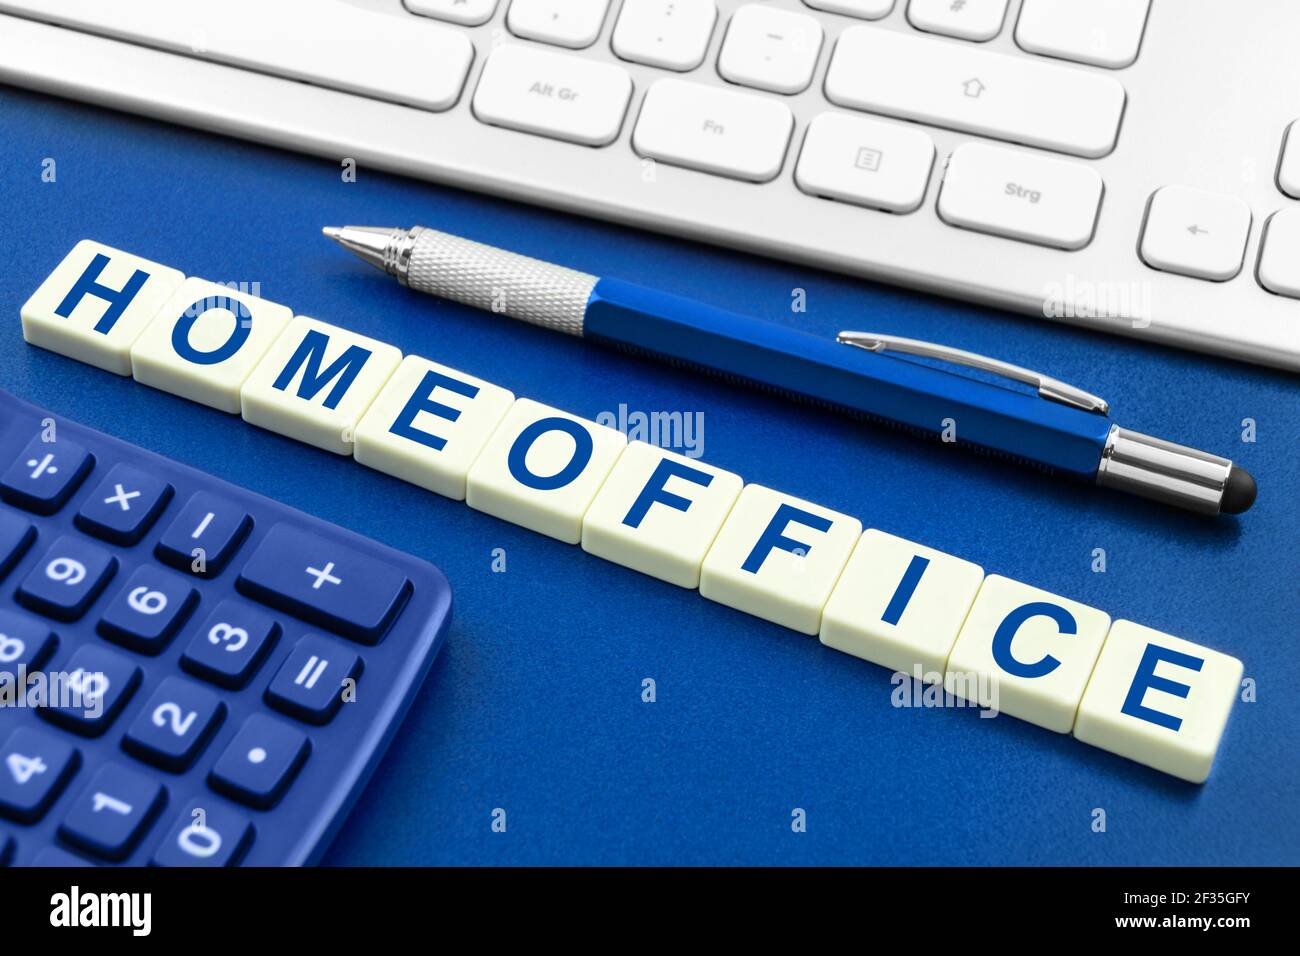 Business Homeoffice and PC keyboard close up Stock Photo